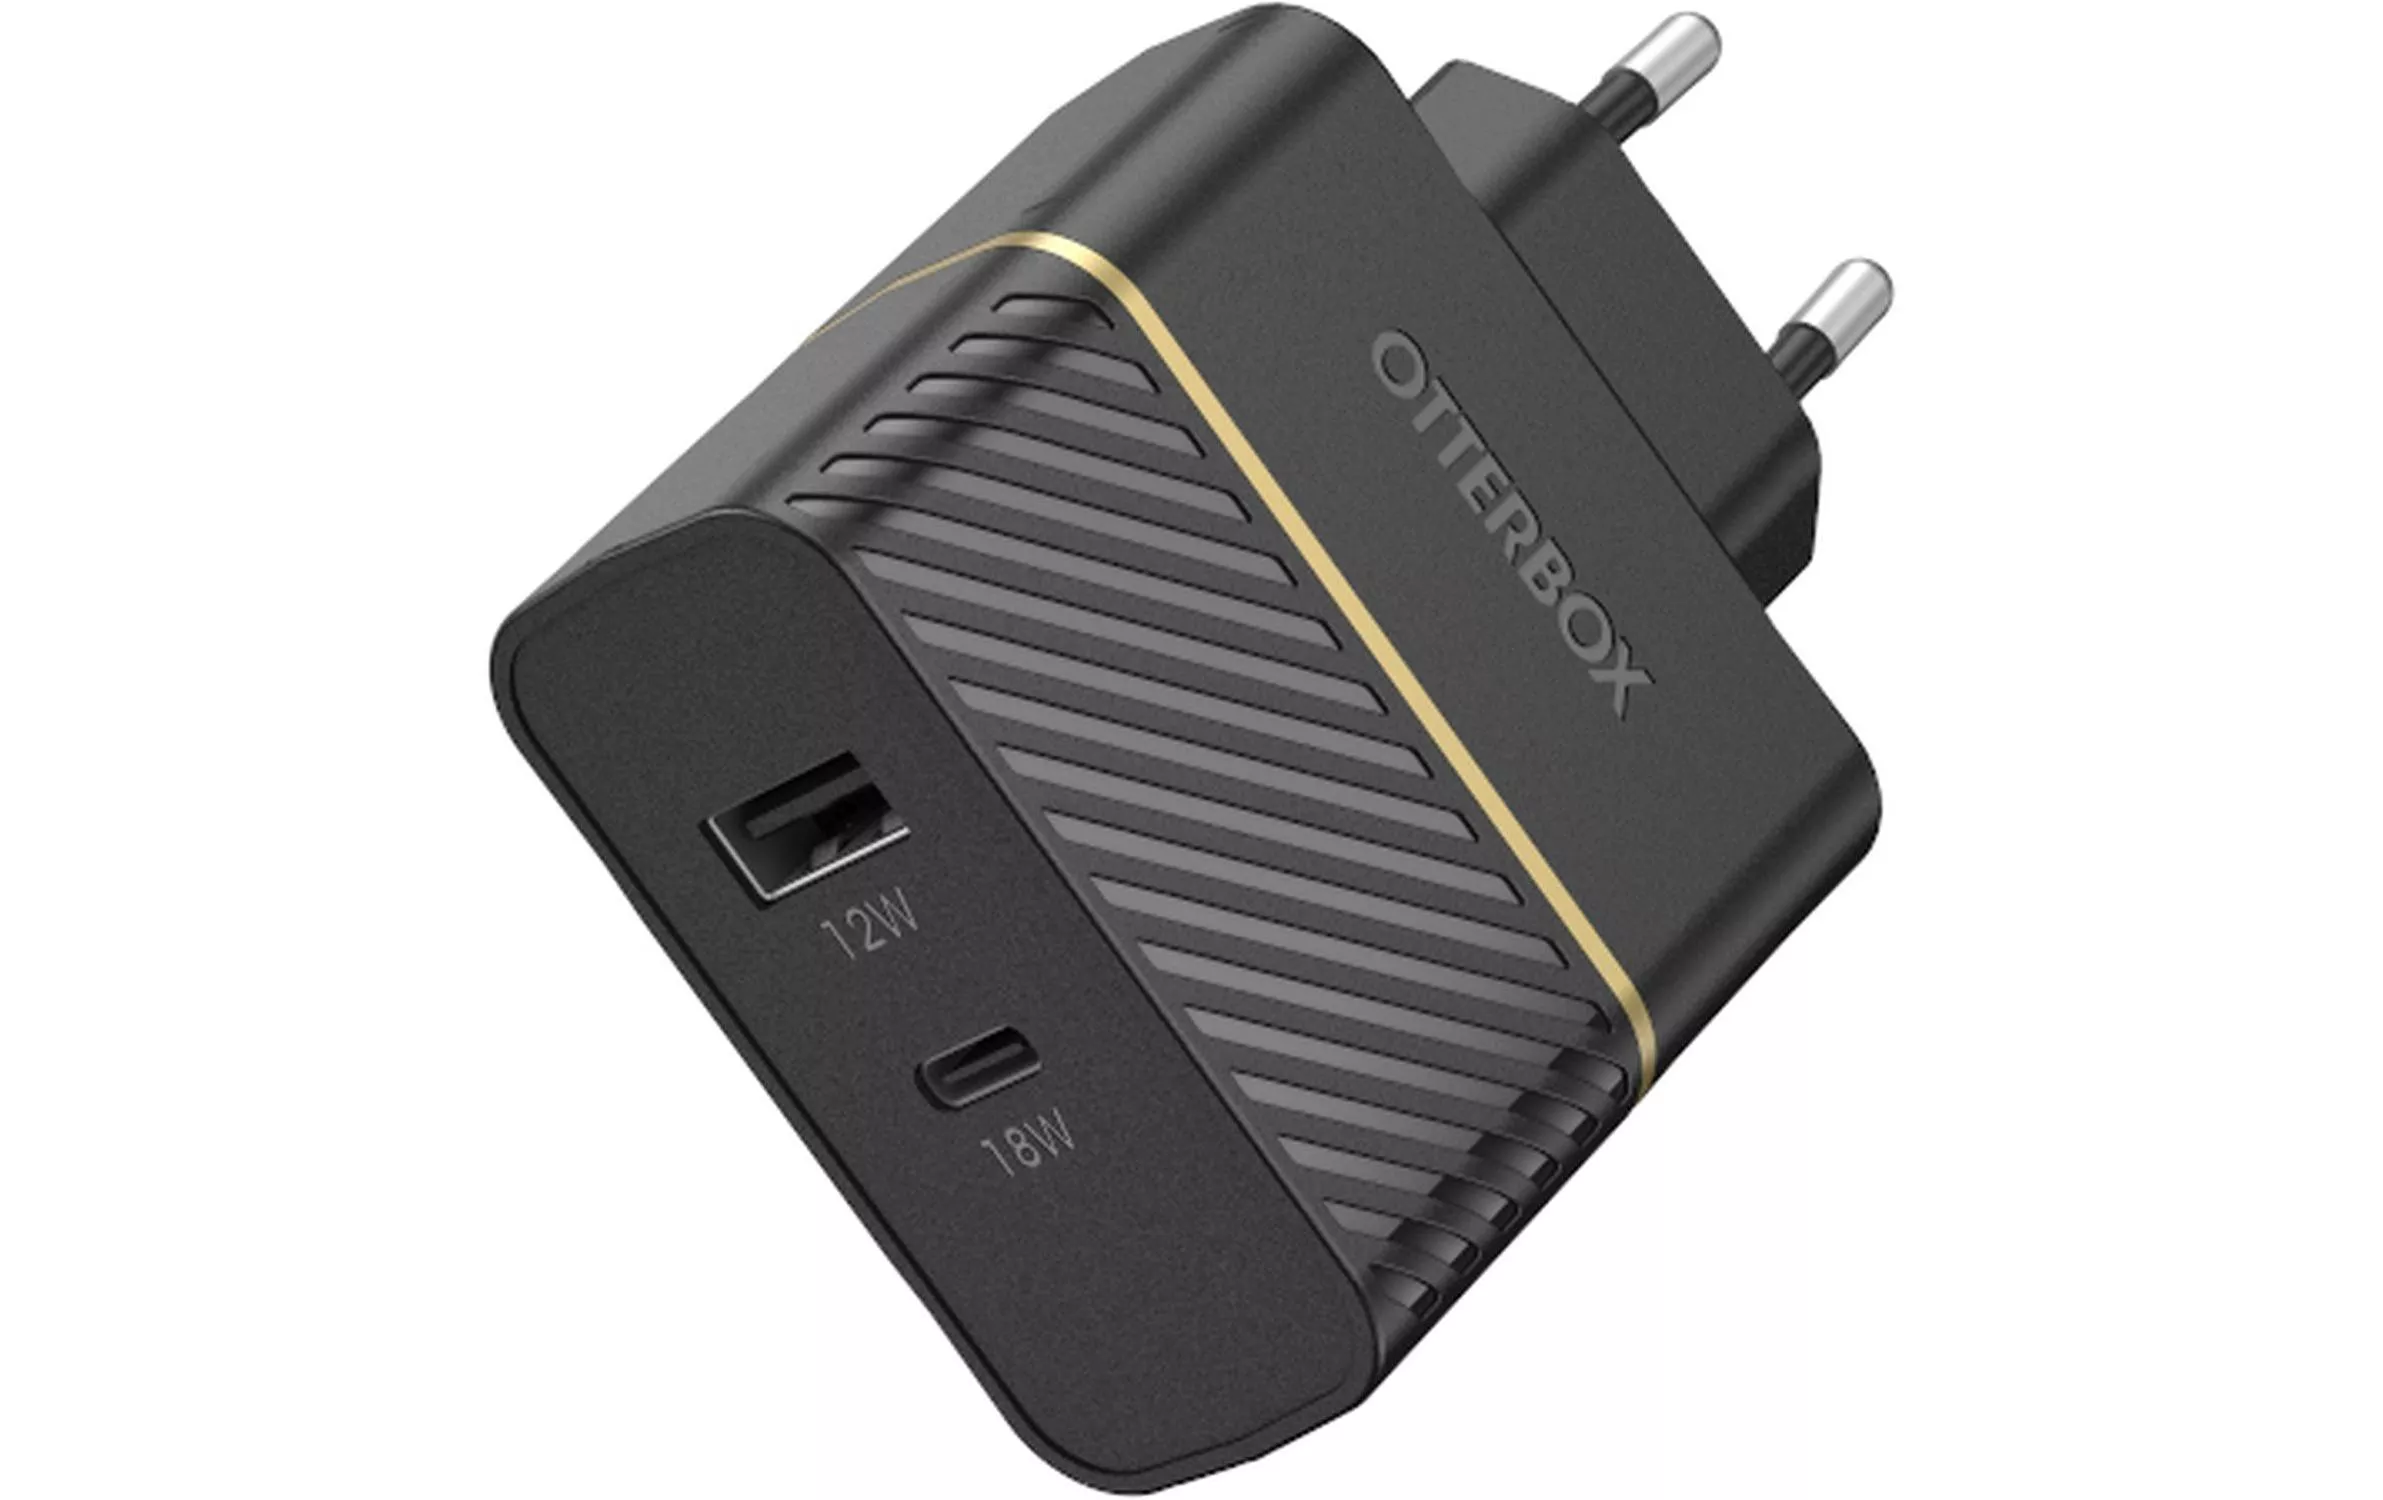 USB Wall Charger USB-A / USB-C / 12+18W Fast Charge